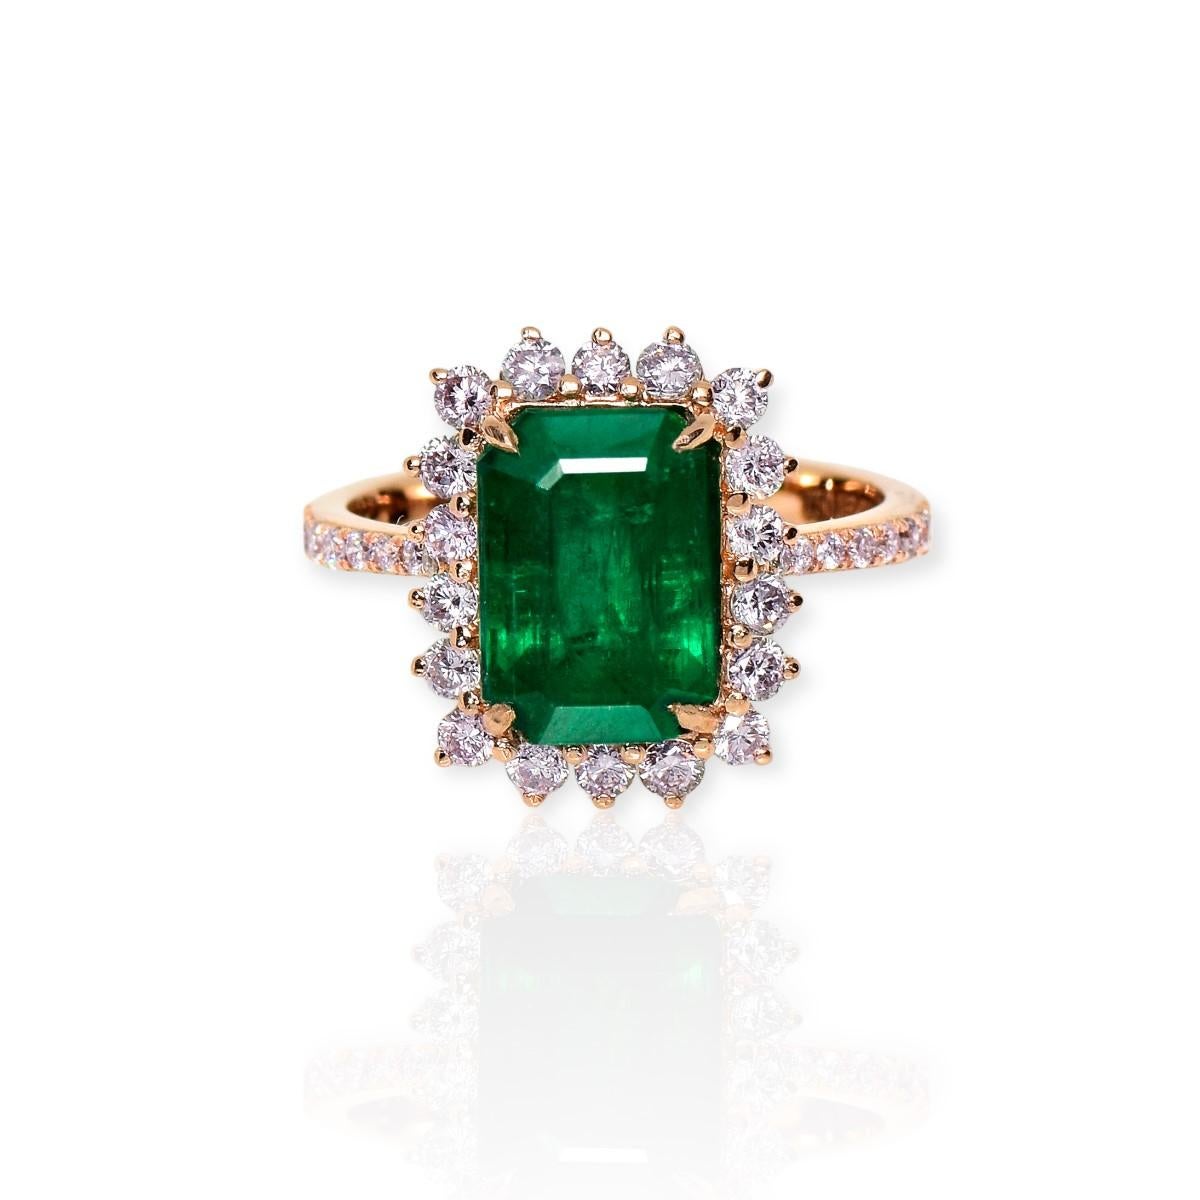 *IGI 18K 3.26 ct Natural Green Emerald&Pink Diamond Art Deco Engagement Ring*

IGI-certified natural Zambia intense green emerald weighing 3.26 ct set on the 18K rose gold arc deco design band with natural pink diamonds weighing 0.68 ct. 

The